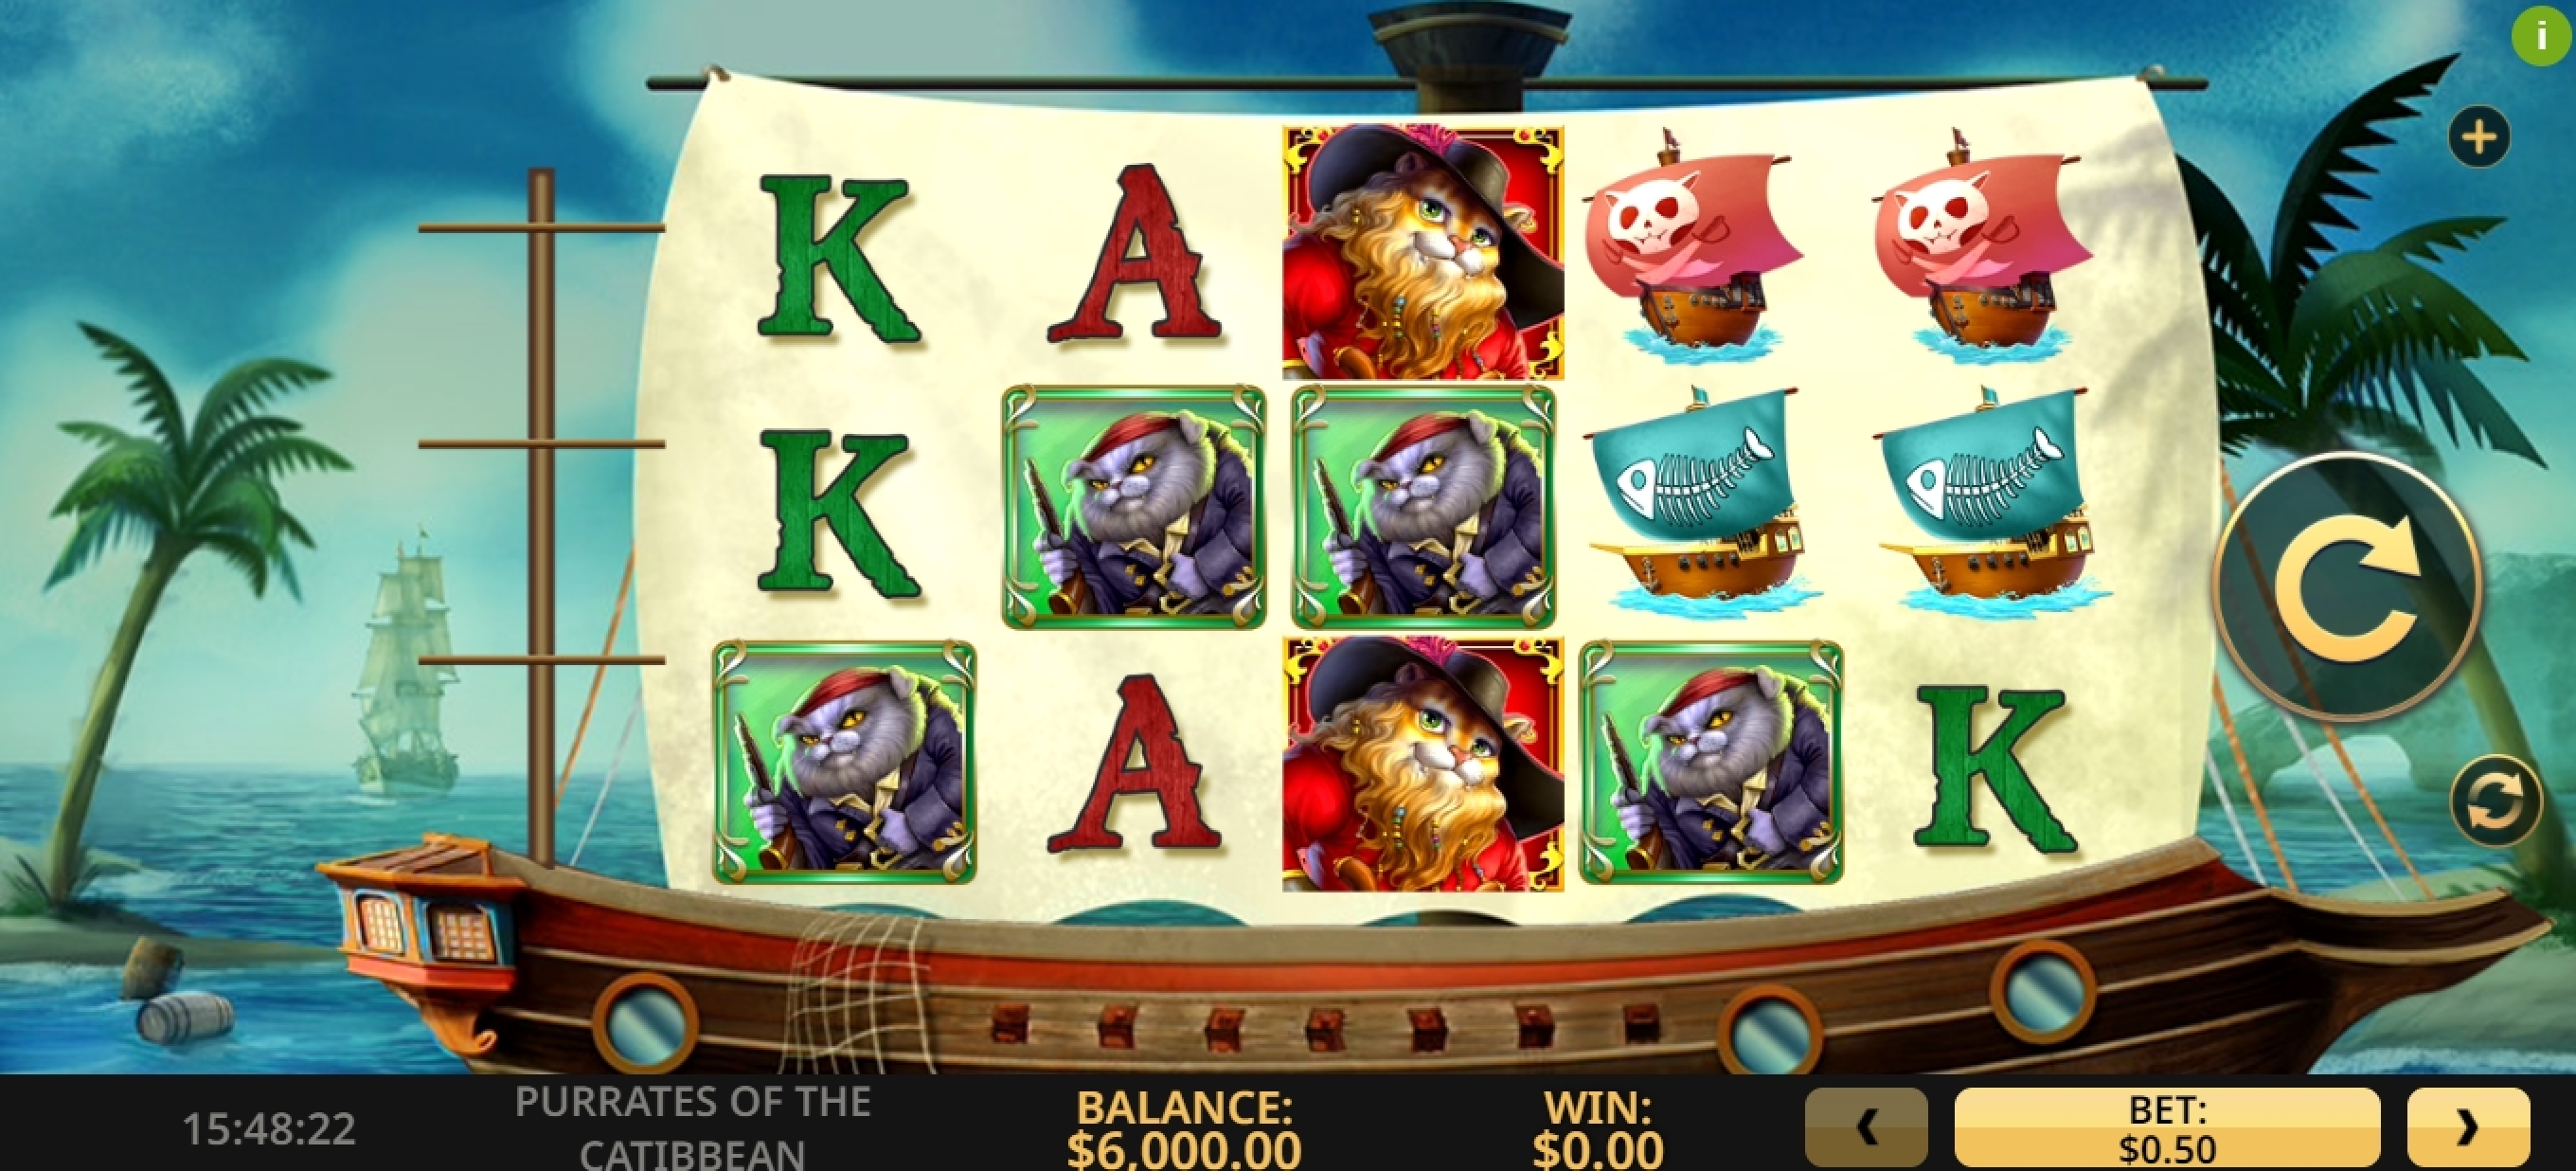 Reels in Purrates of the Catibbean Slot Game by High 5 Games